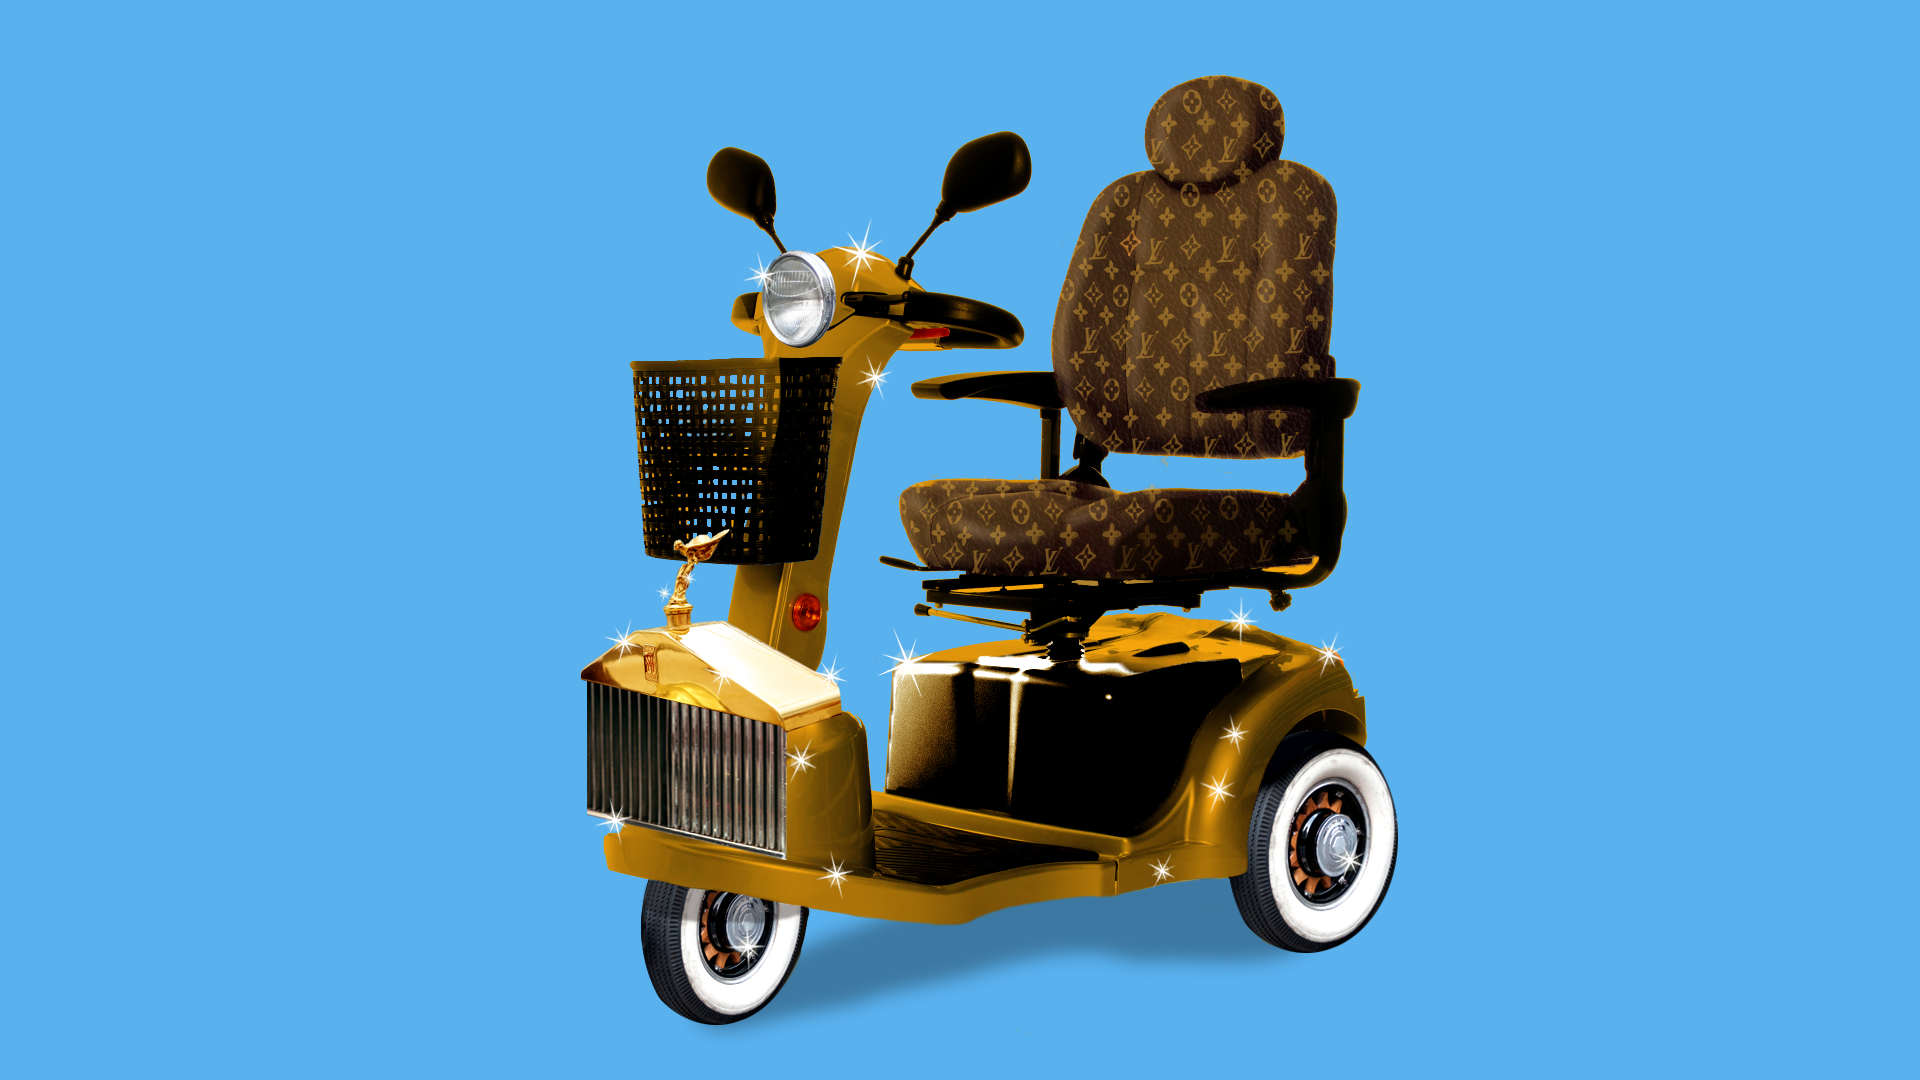 Illustration of a mobility scooter made out of gold